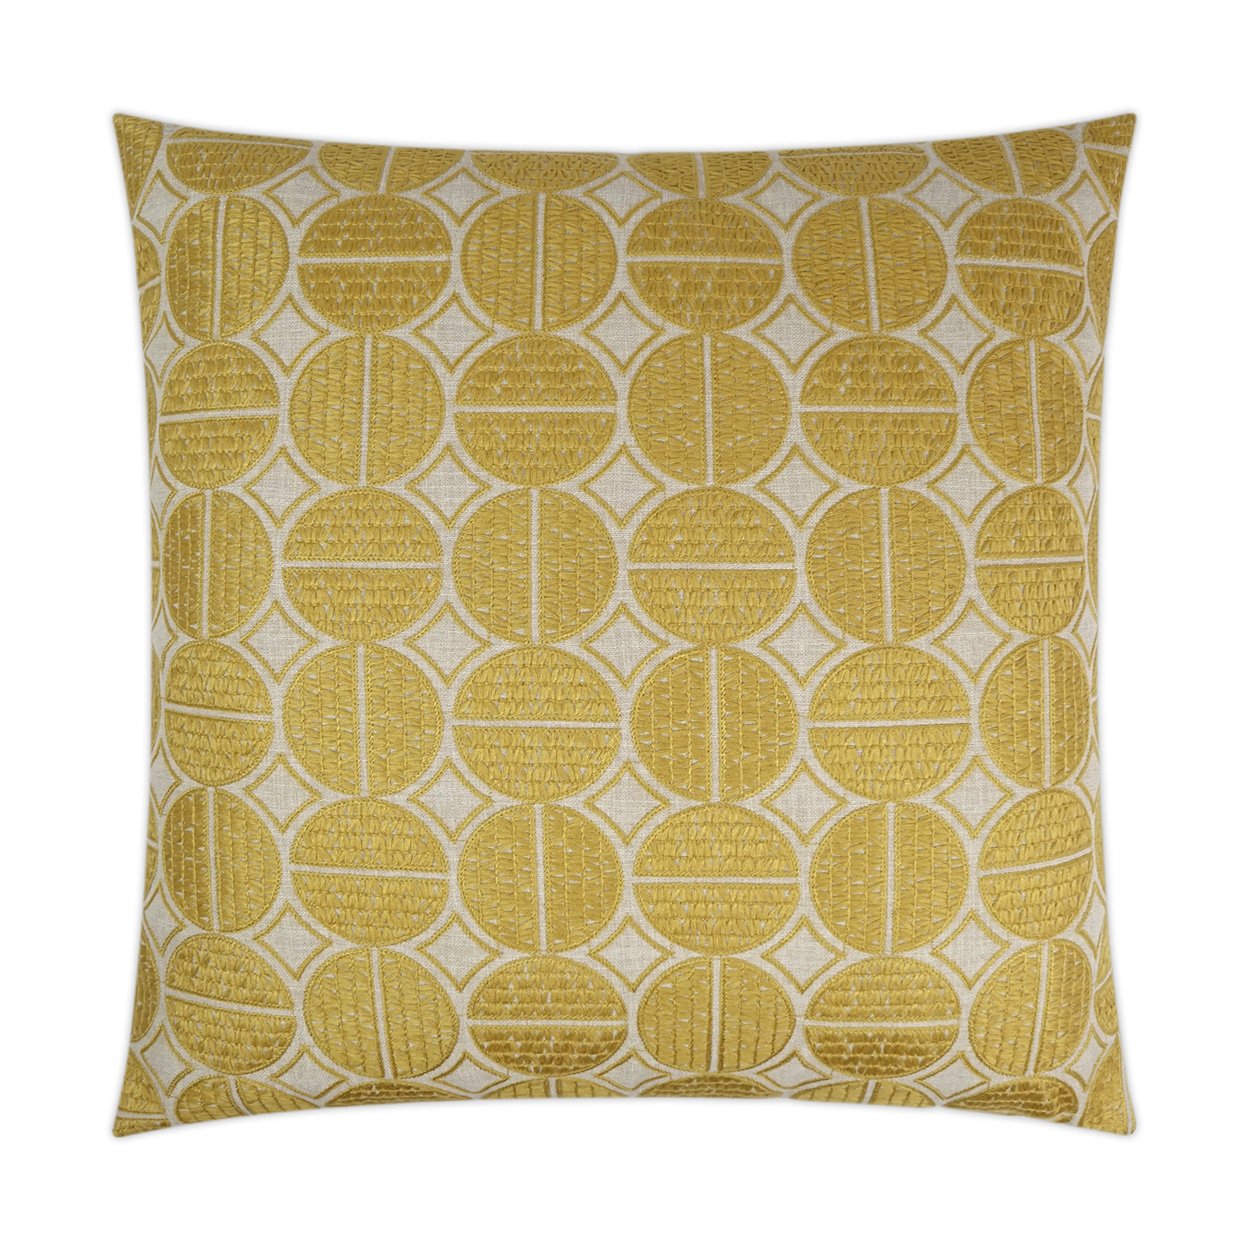 Luxury Pillow - 24" x 24" - Medallions Mustard; Embroidered yellow mustard color dots on a cream background